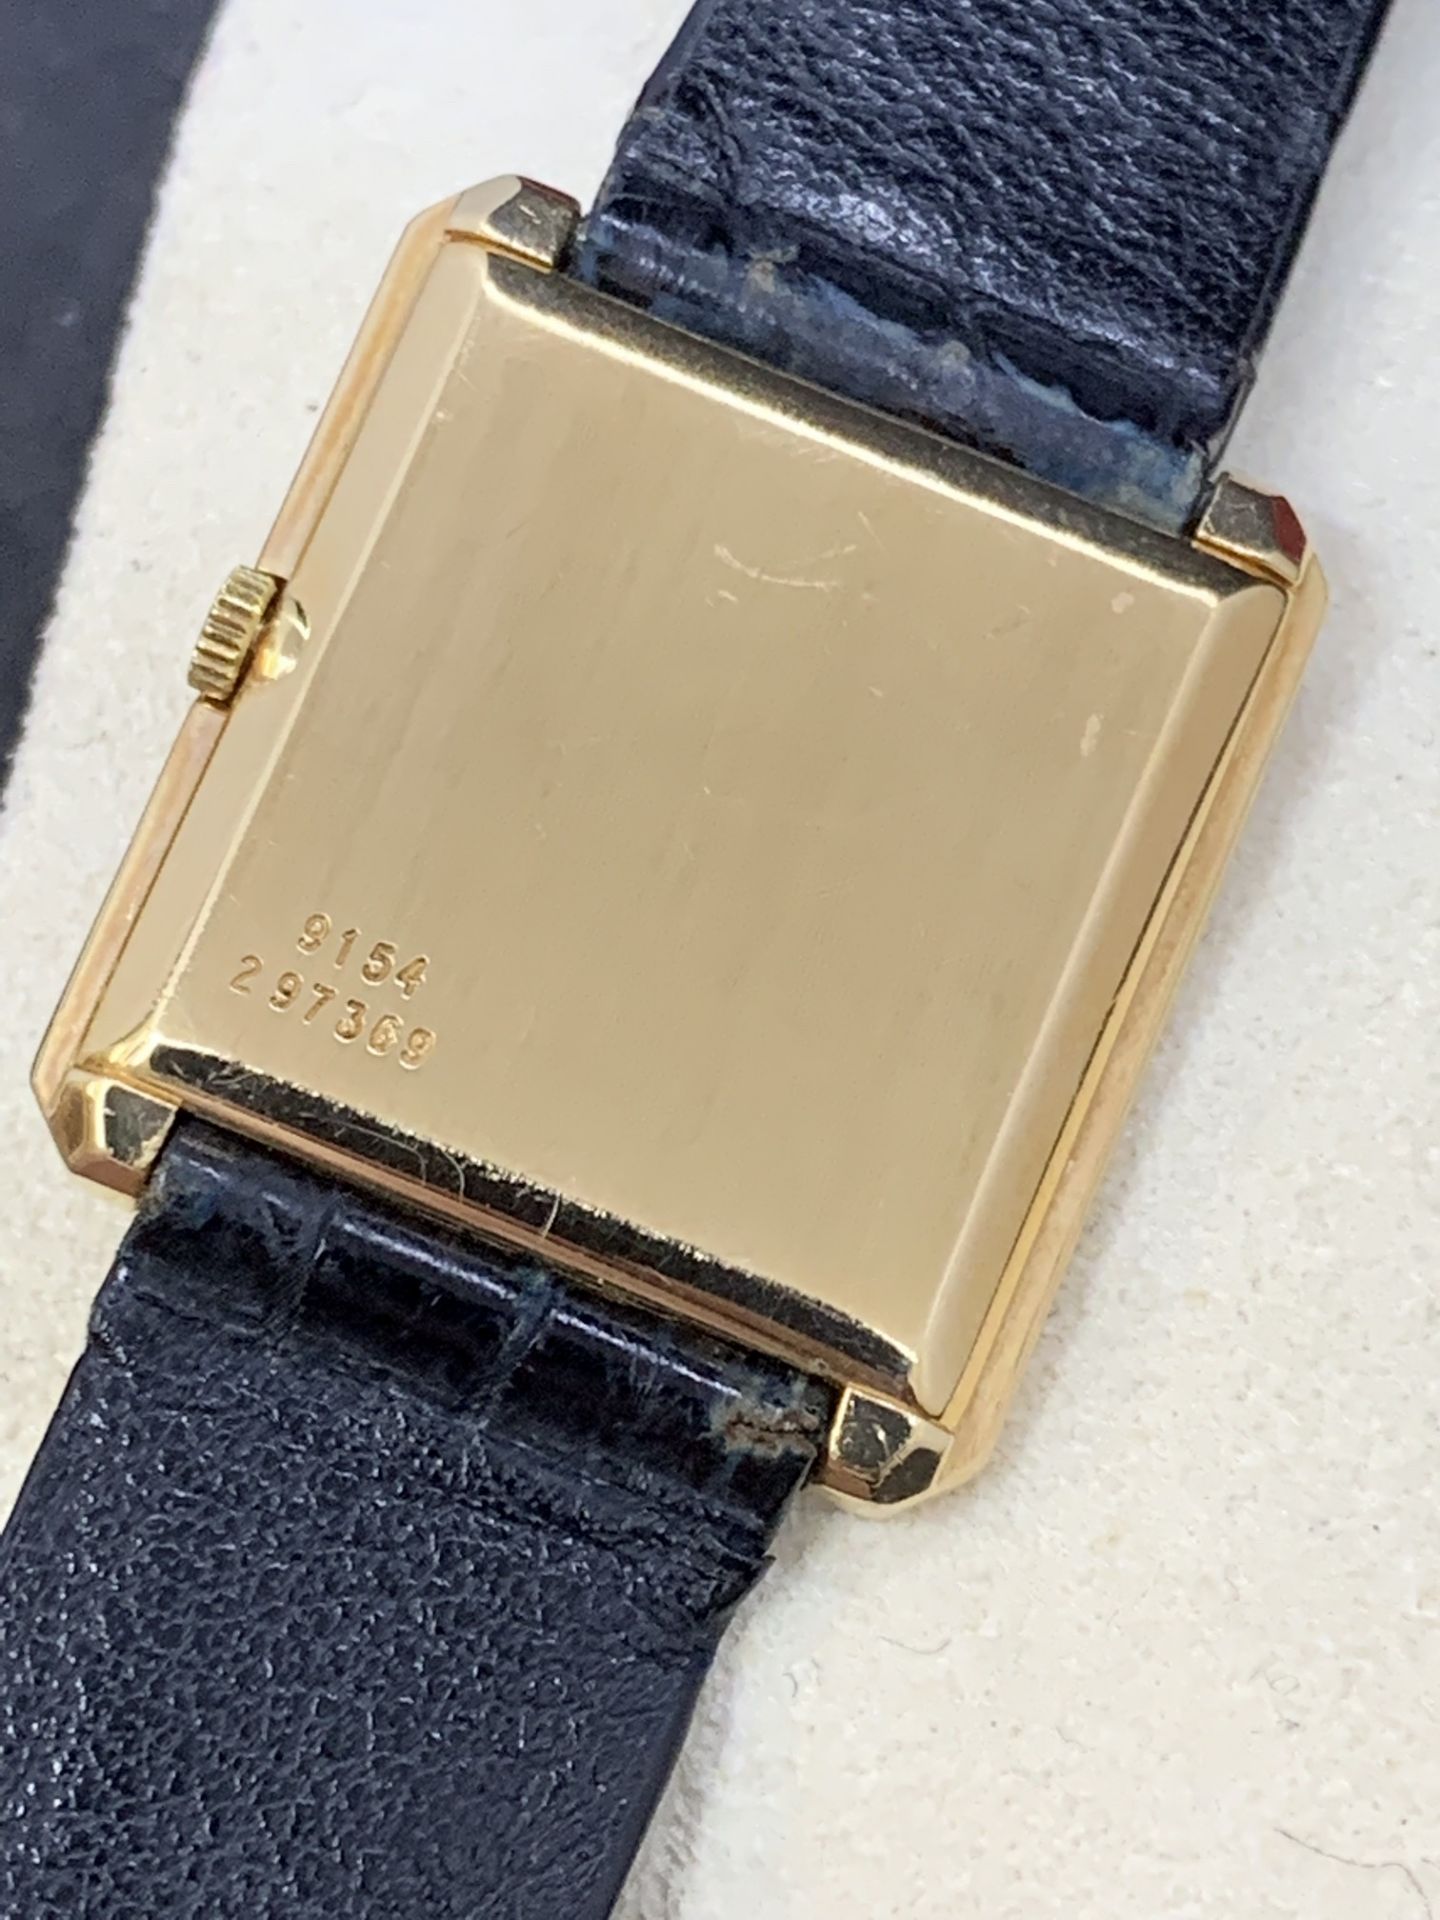 PIAGET 18ct GOLD SQUARE FACE WATCH - Image 6 of 9